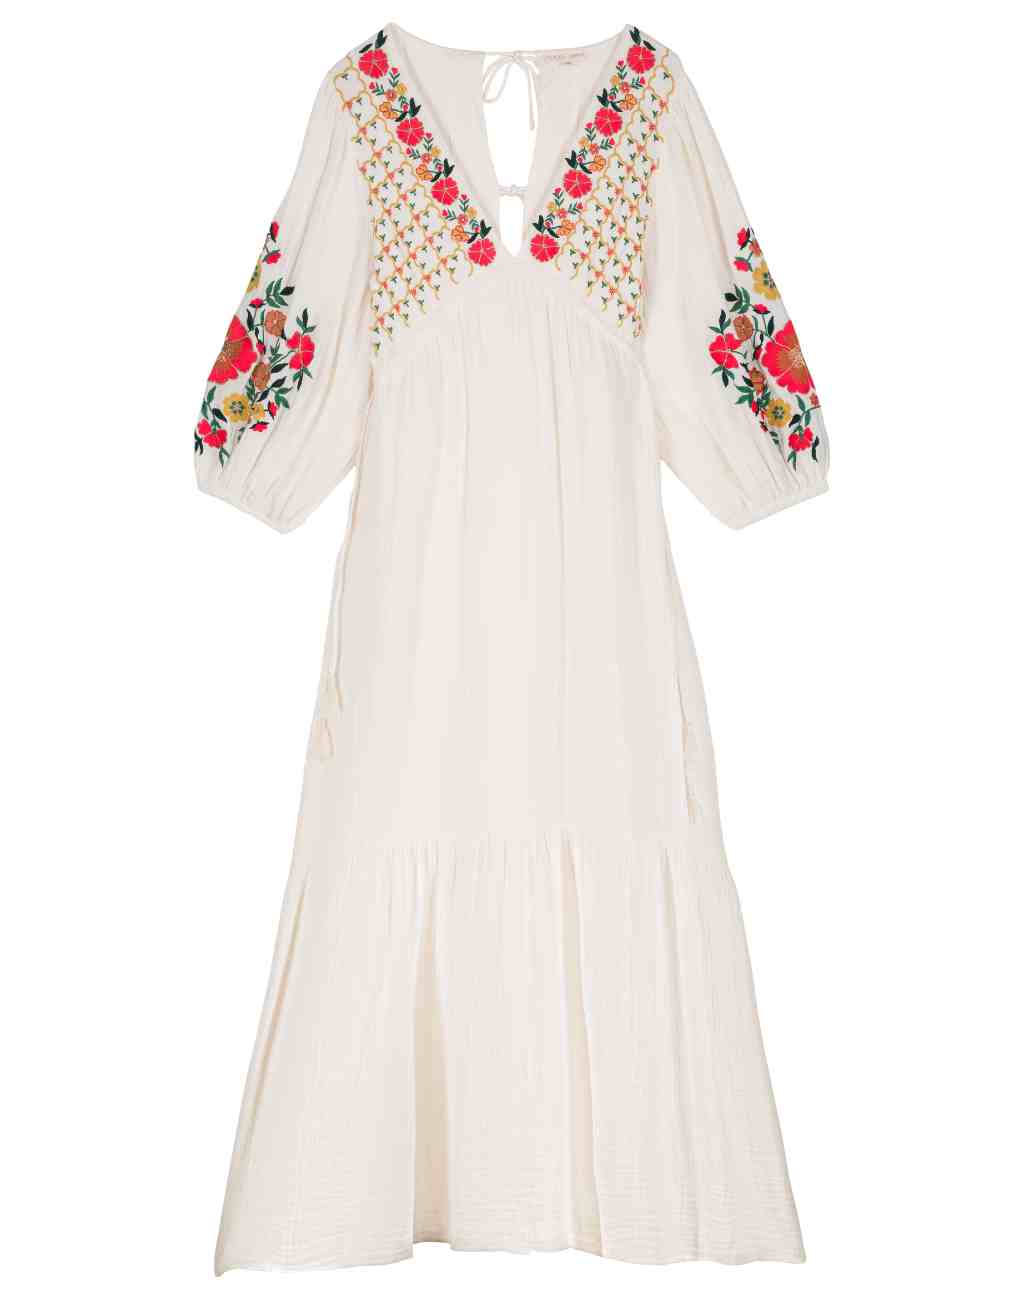 Bali Maxi Dress with Colorful Embroidery